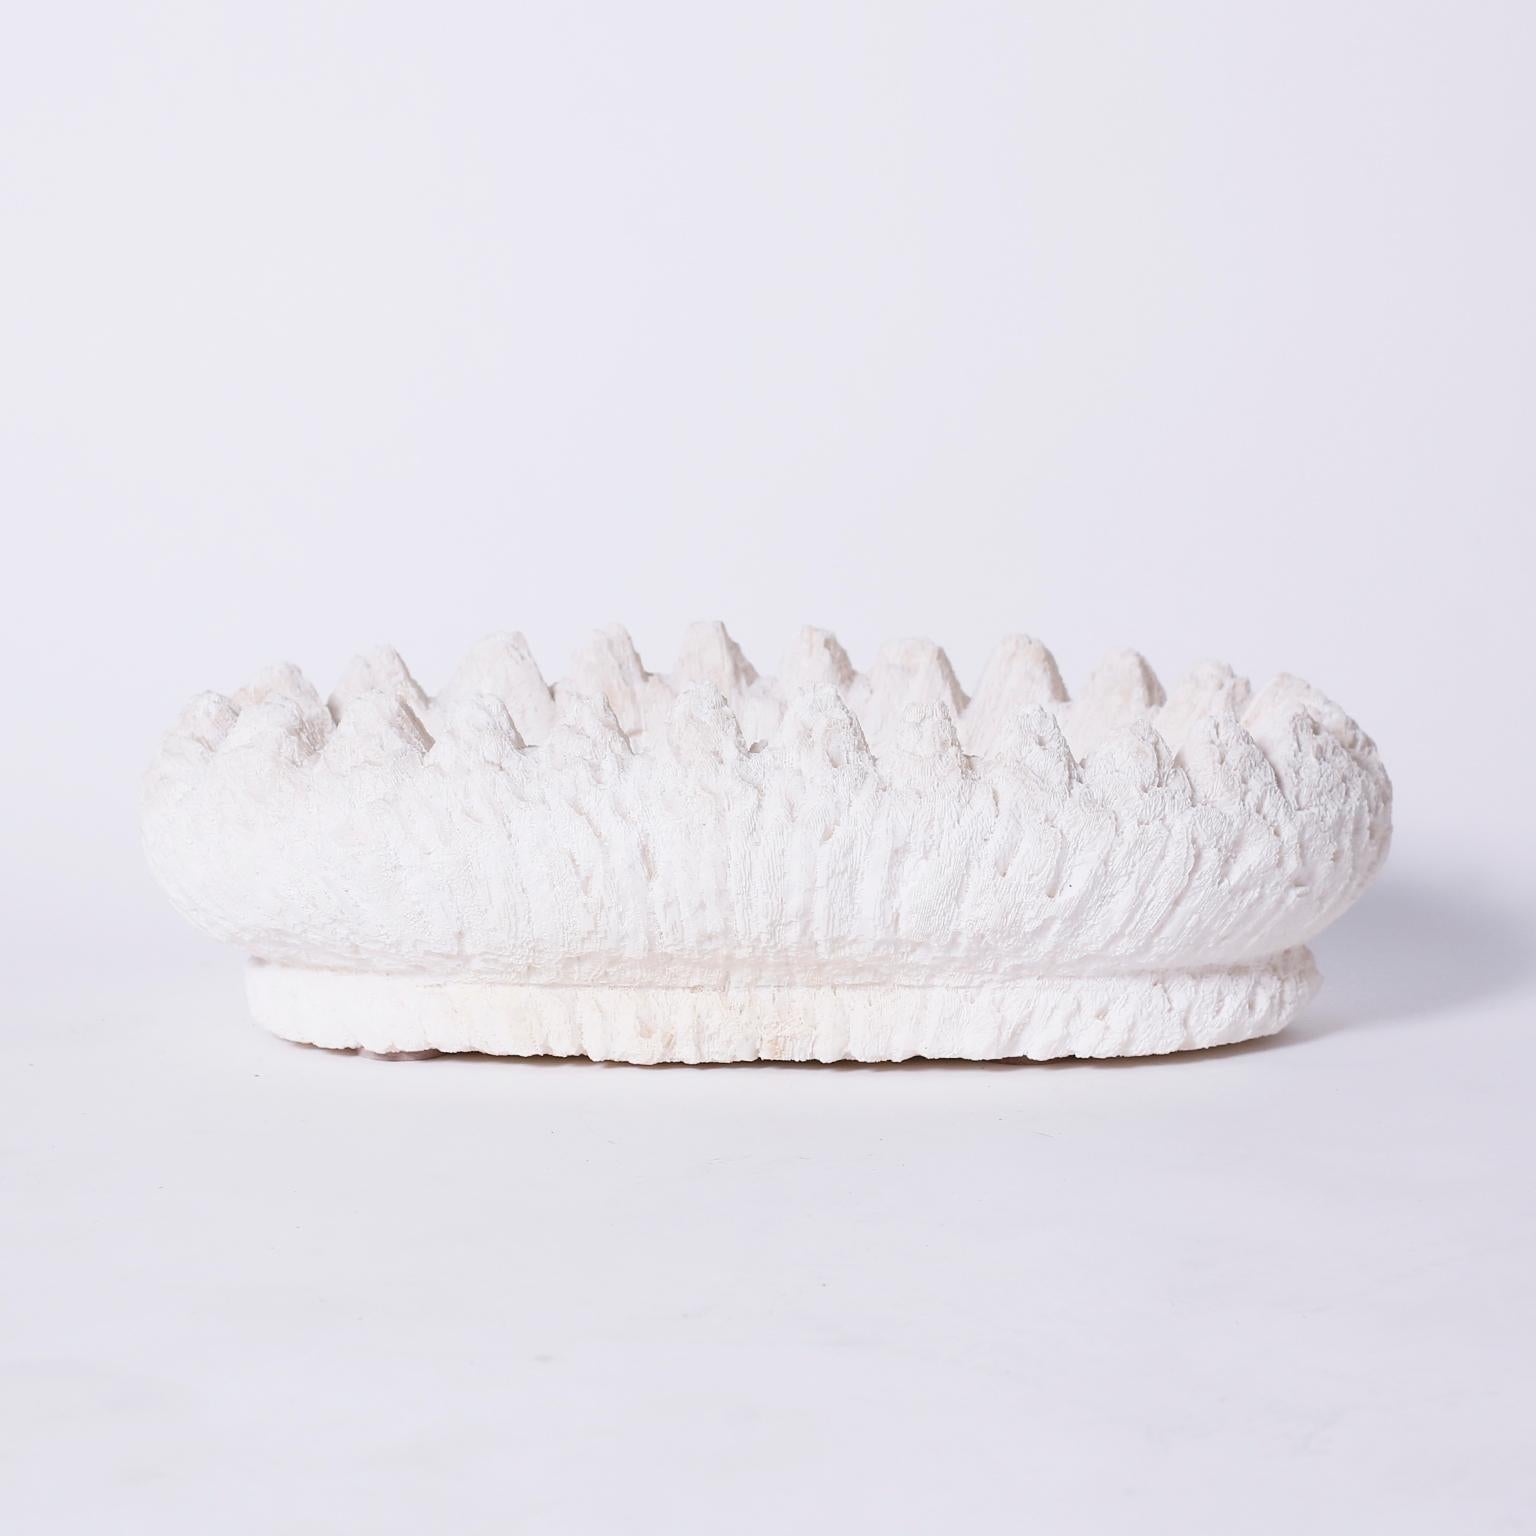 Here is a large piece of bowl coral with its bleached white color and sea inspired texture, carved and repurposed as a bowl or planter.

Available only in the United States of America, shipping outside of the country requires Cities Permits, which